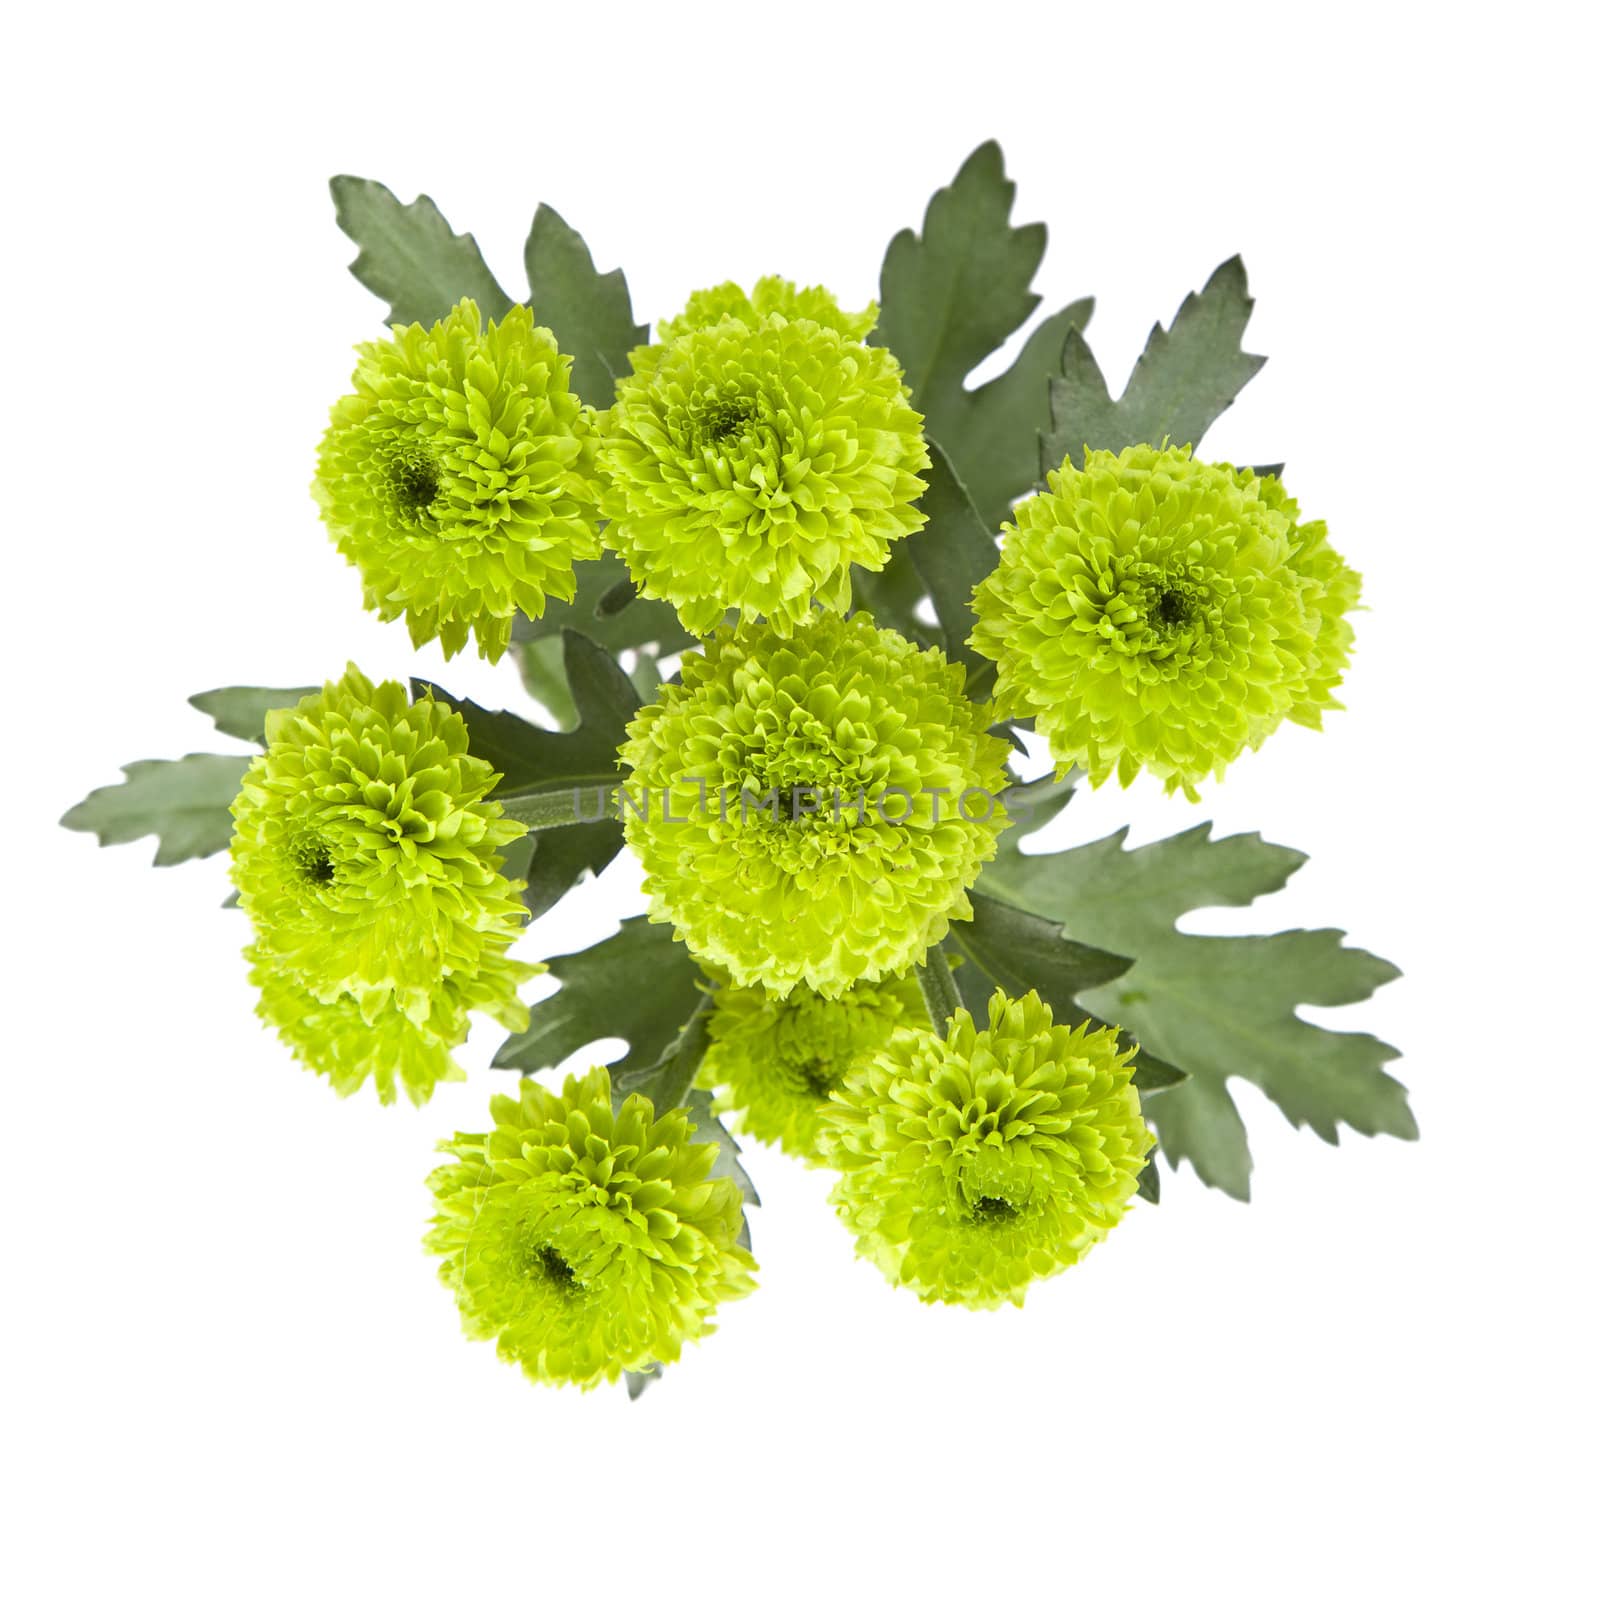 Green chrysanthemums isolated on white background